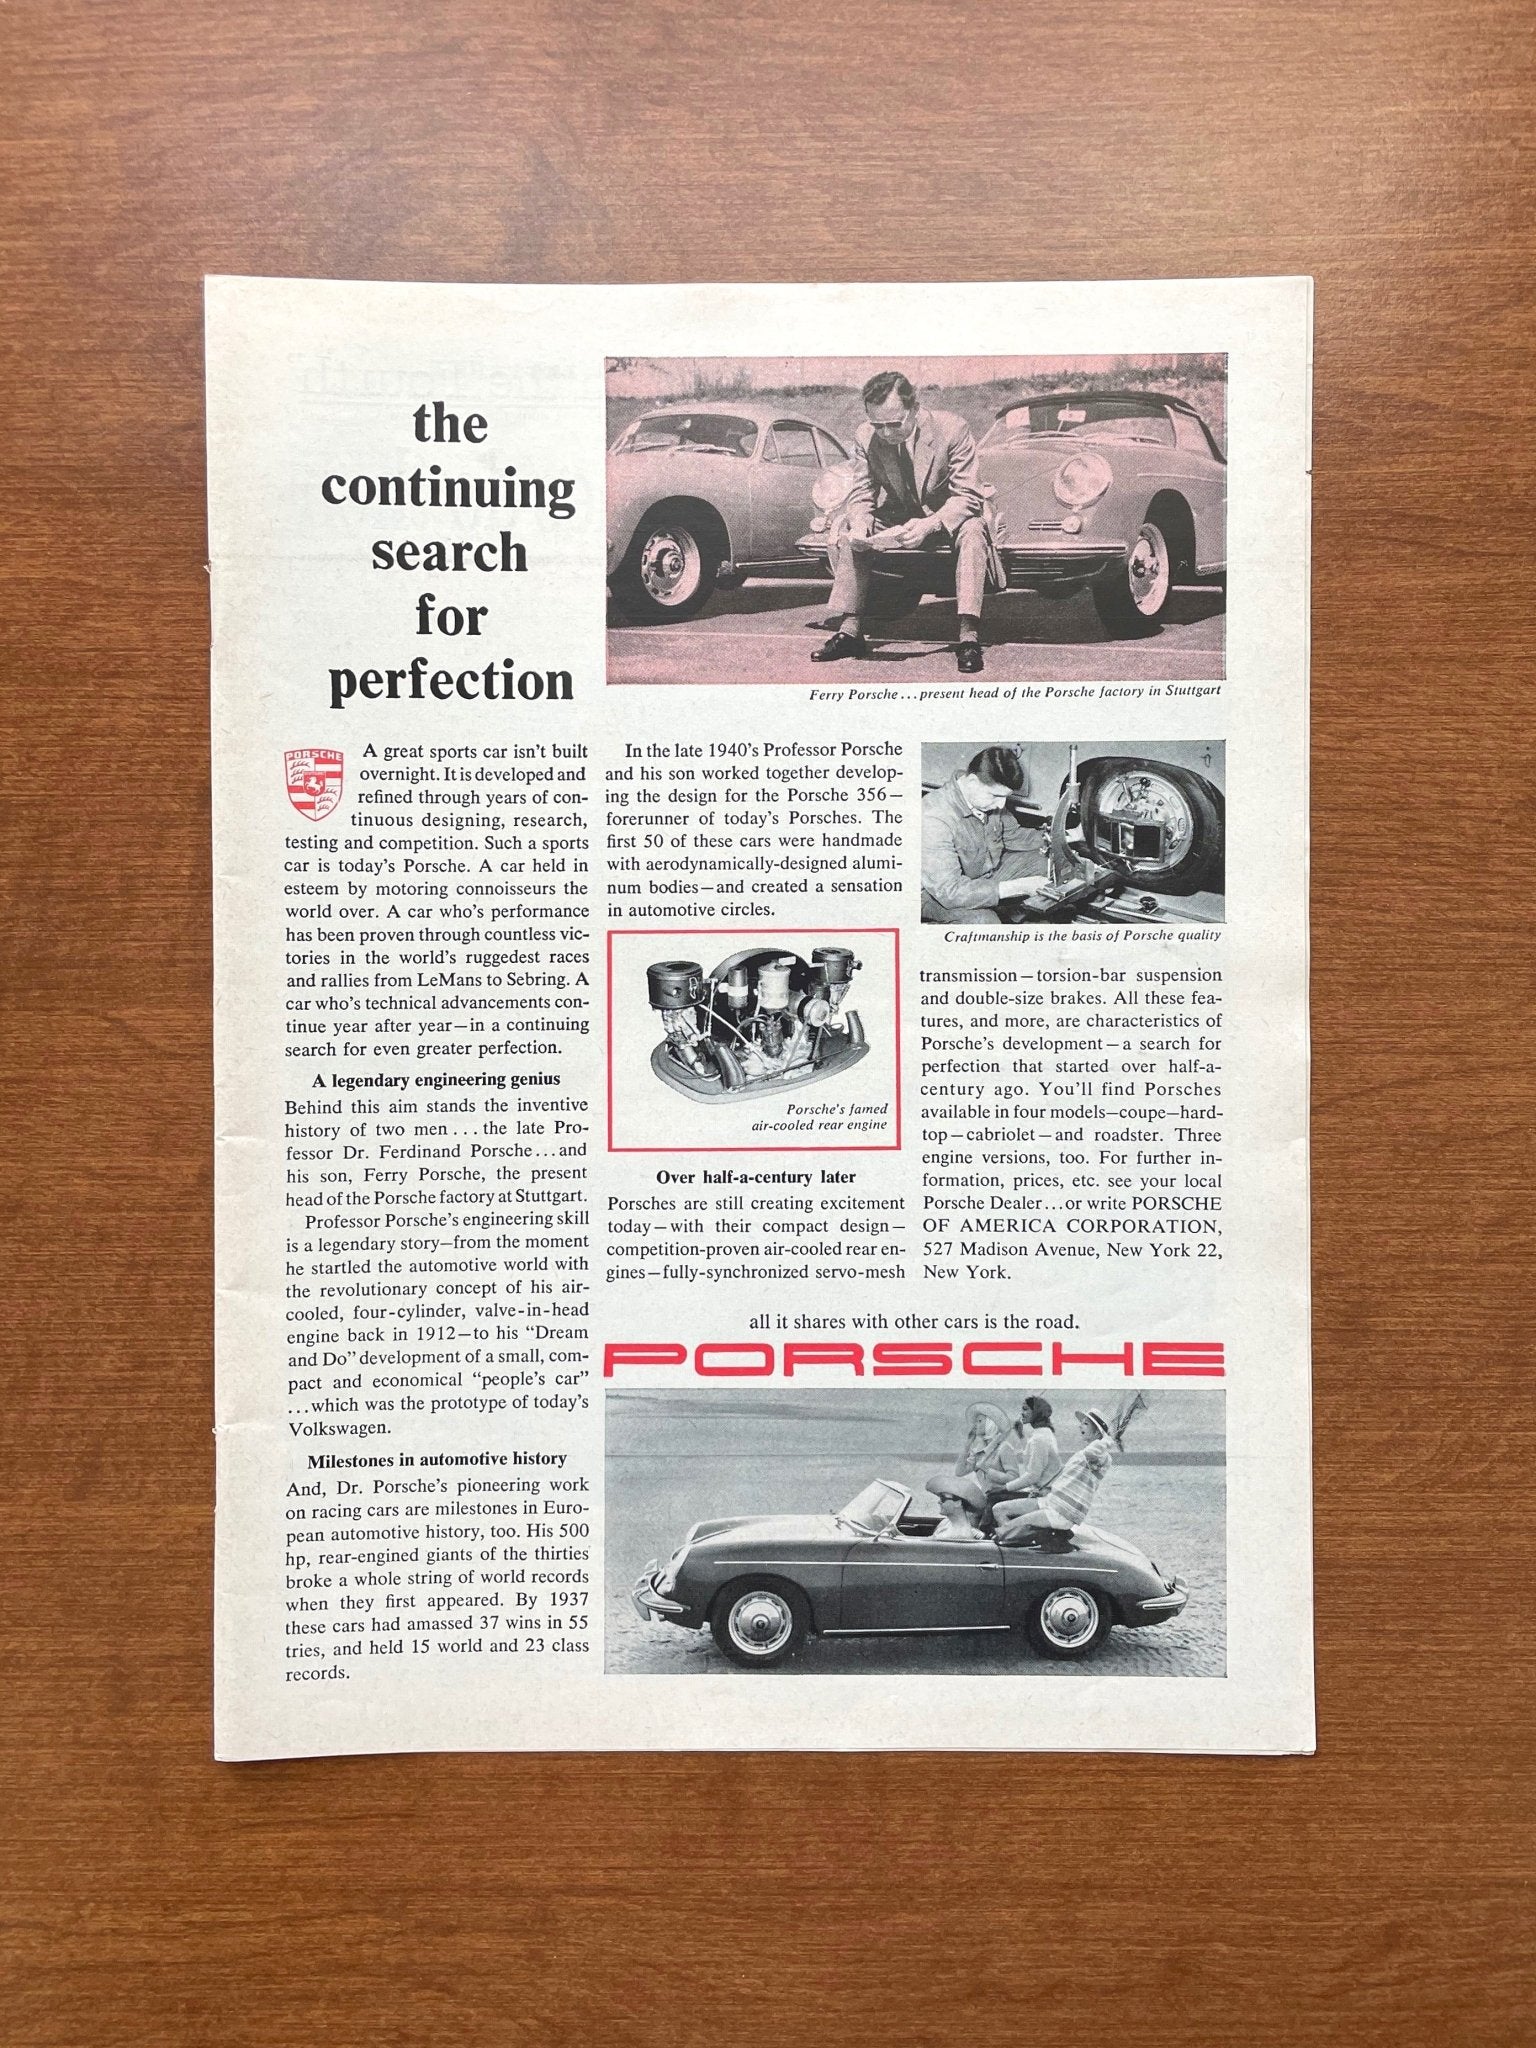 1962 Porsche "the continuing search for perfection" Advertisement